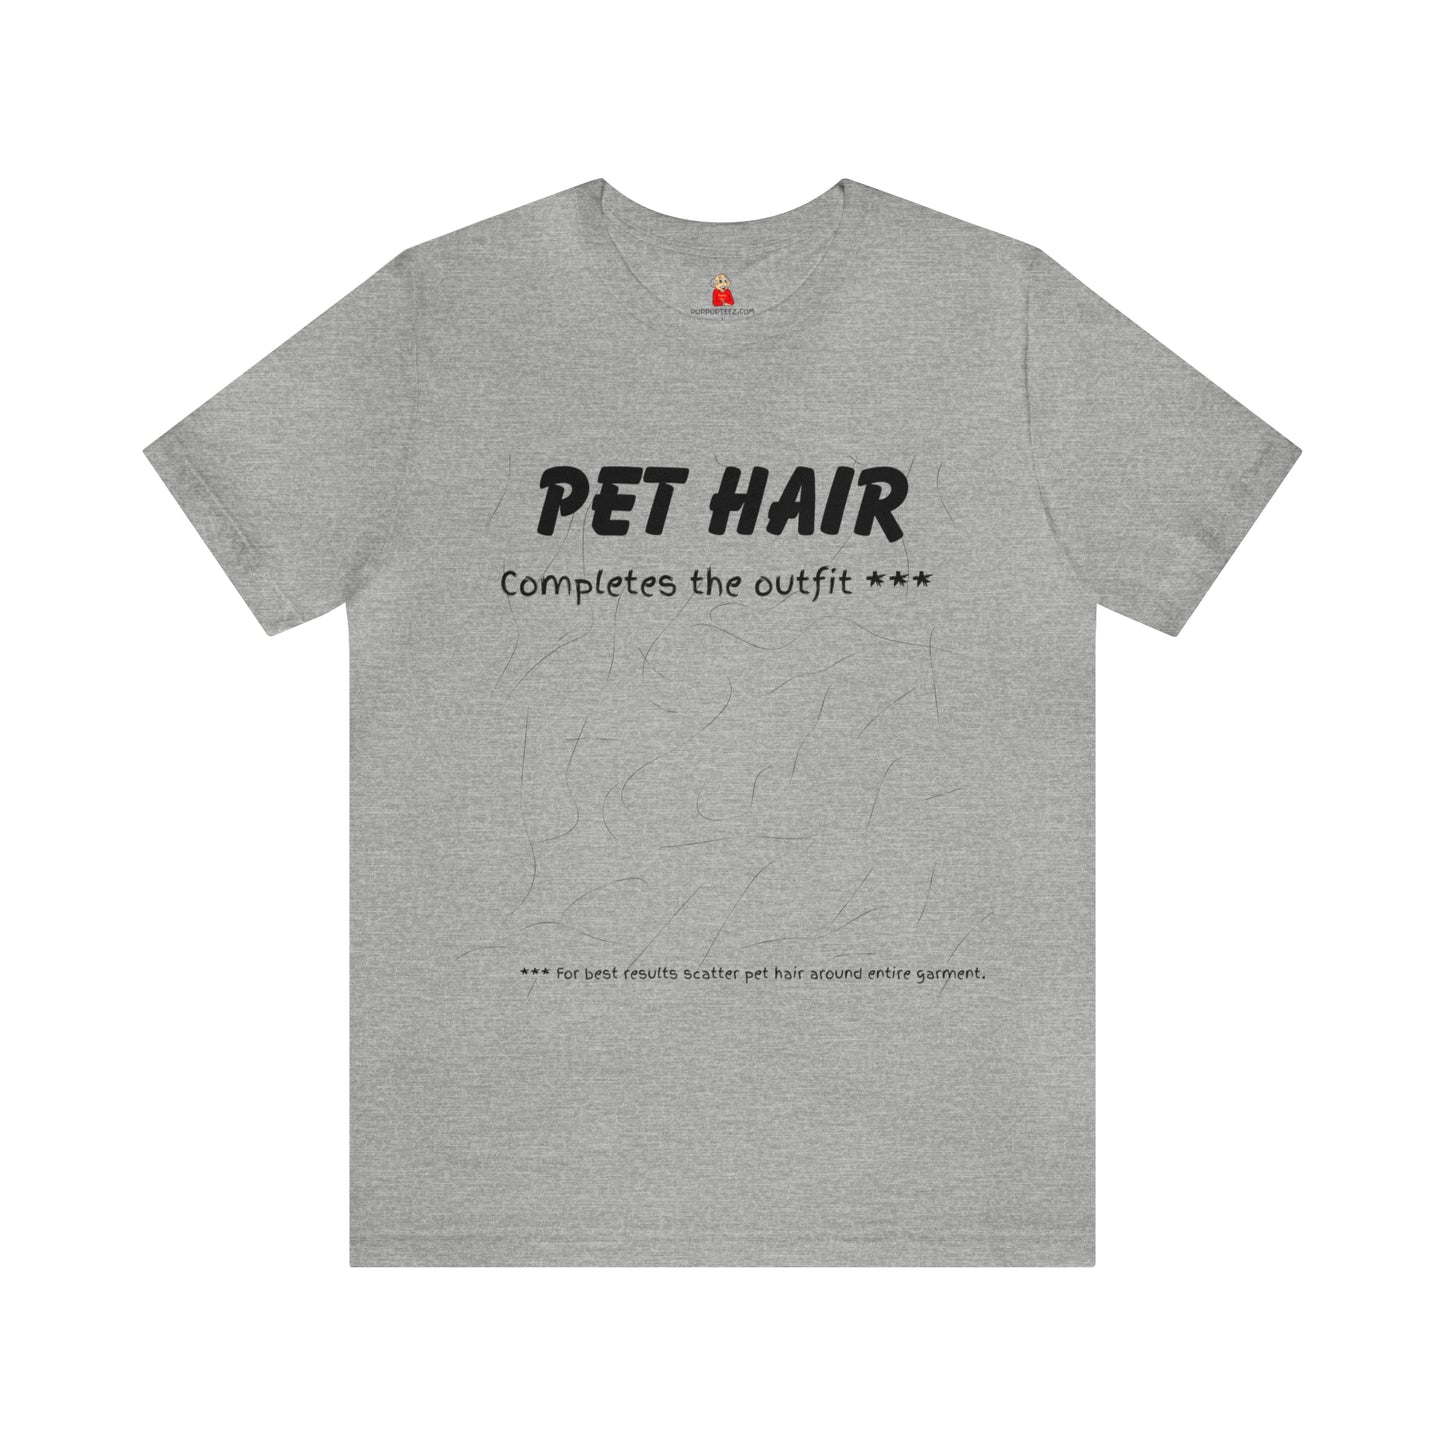 BLACK Pet Hair Completes the Outfit Unisex Jersey Tee